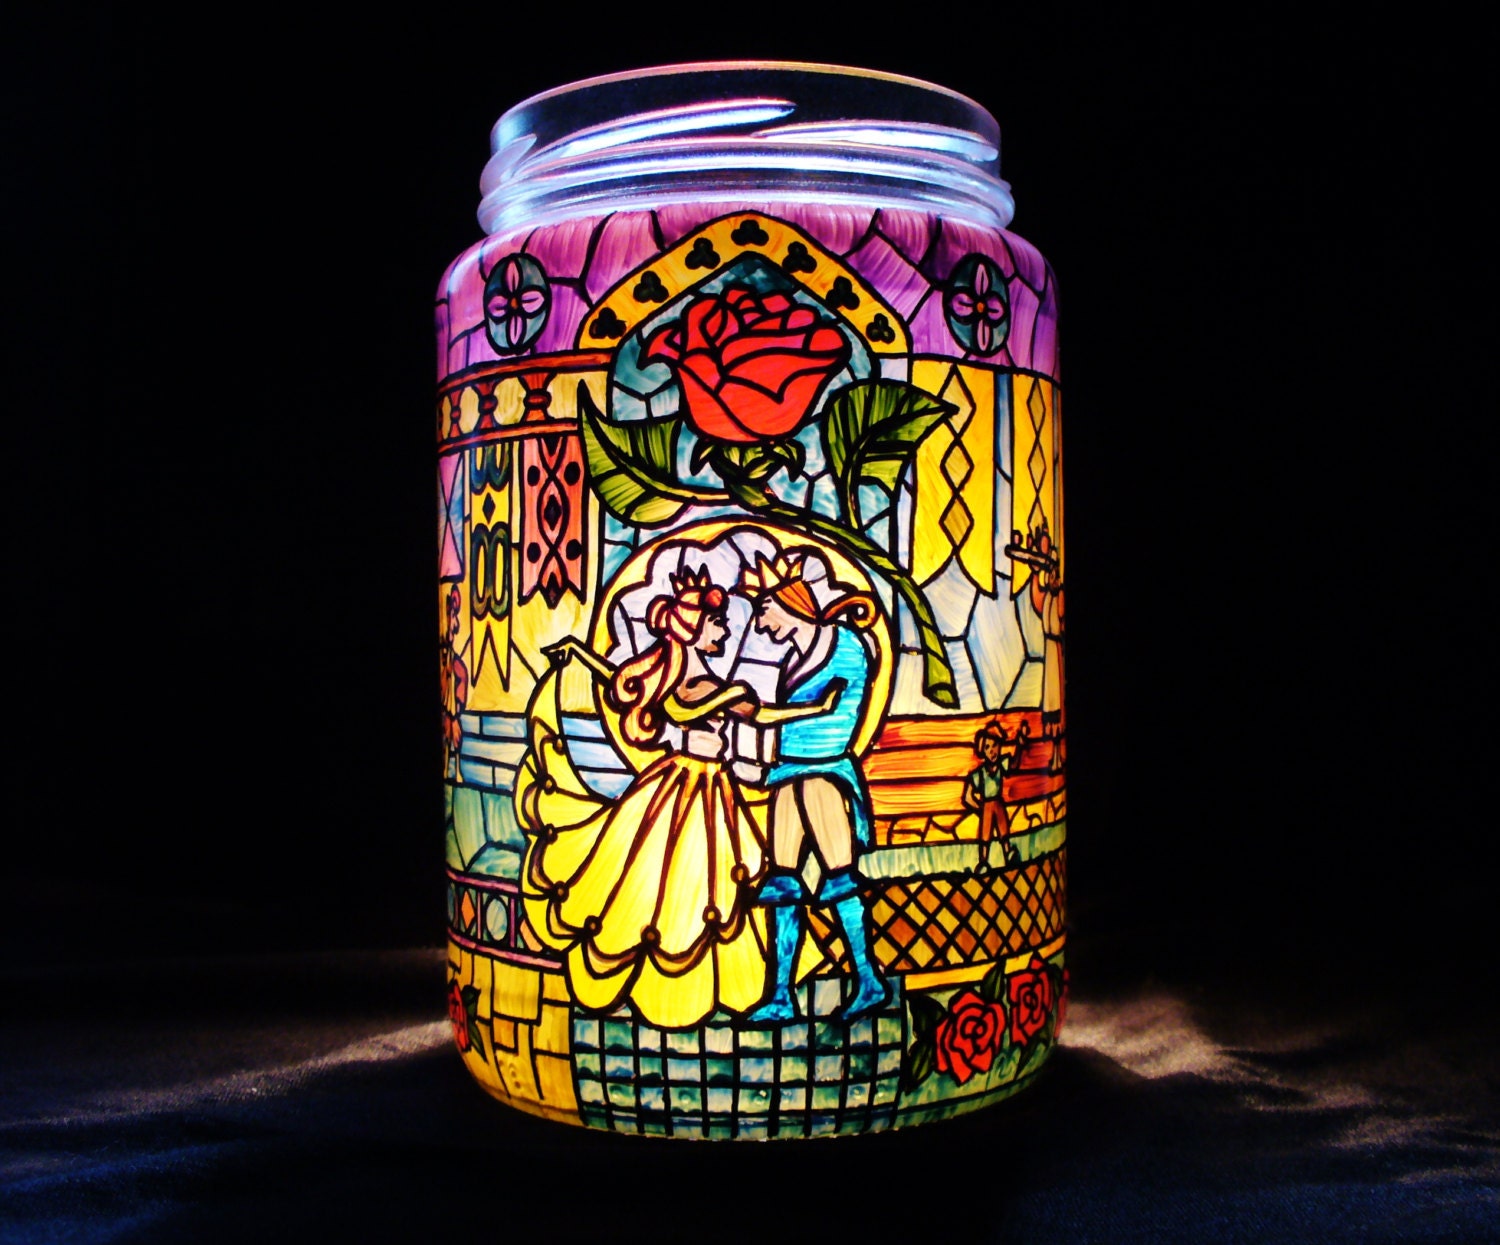 stained glass design on glass jar